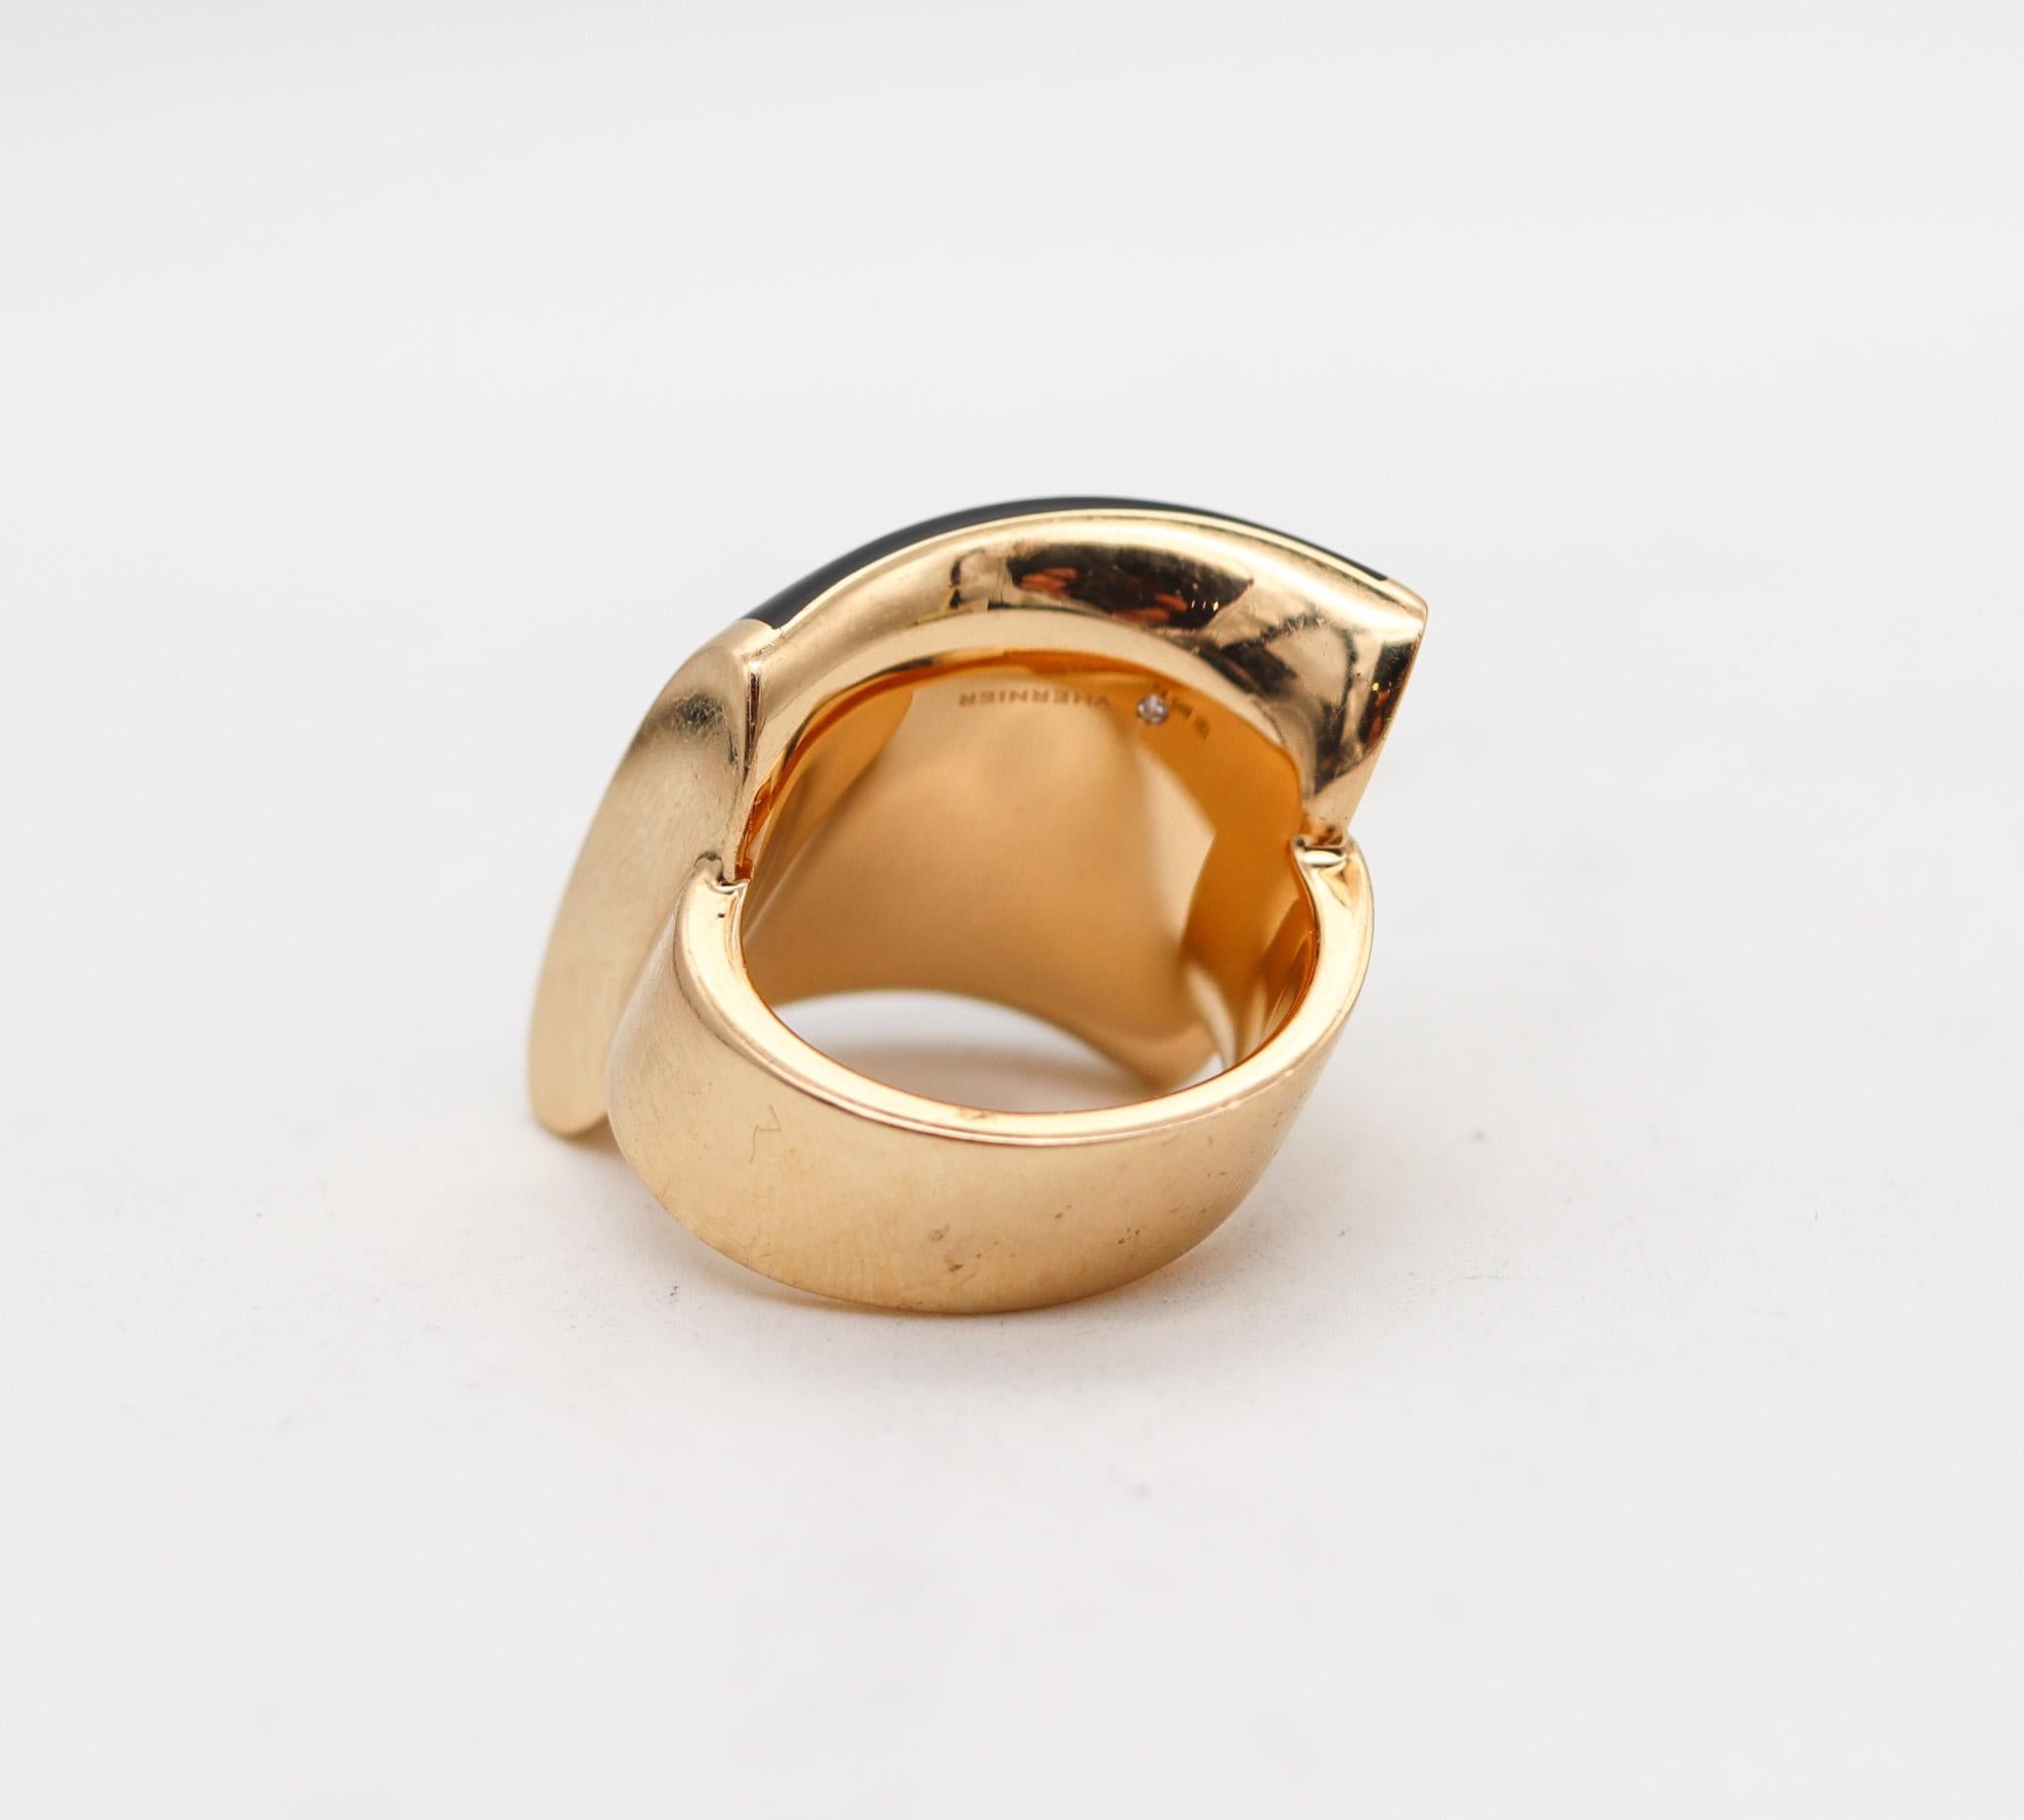 Cabochon Vhernier Milano Large Sculptural Fibula Cocktail Ring in Solid 18kt Yellow Gold For Sale